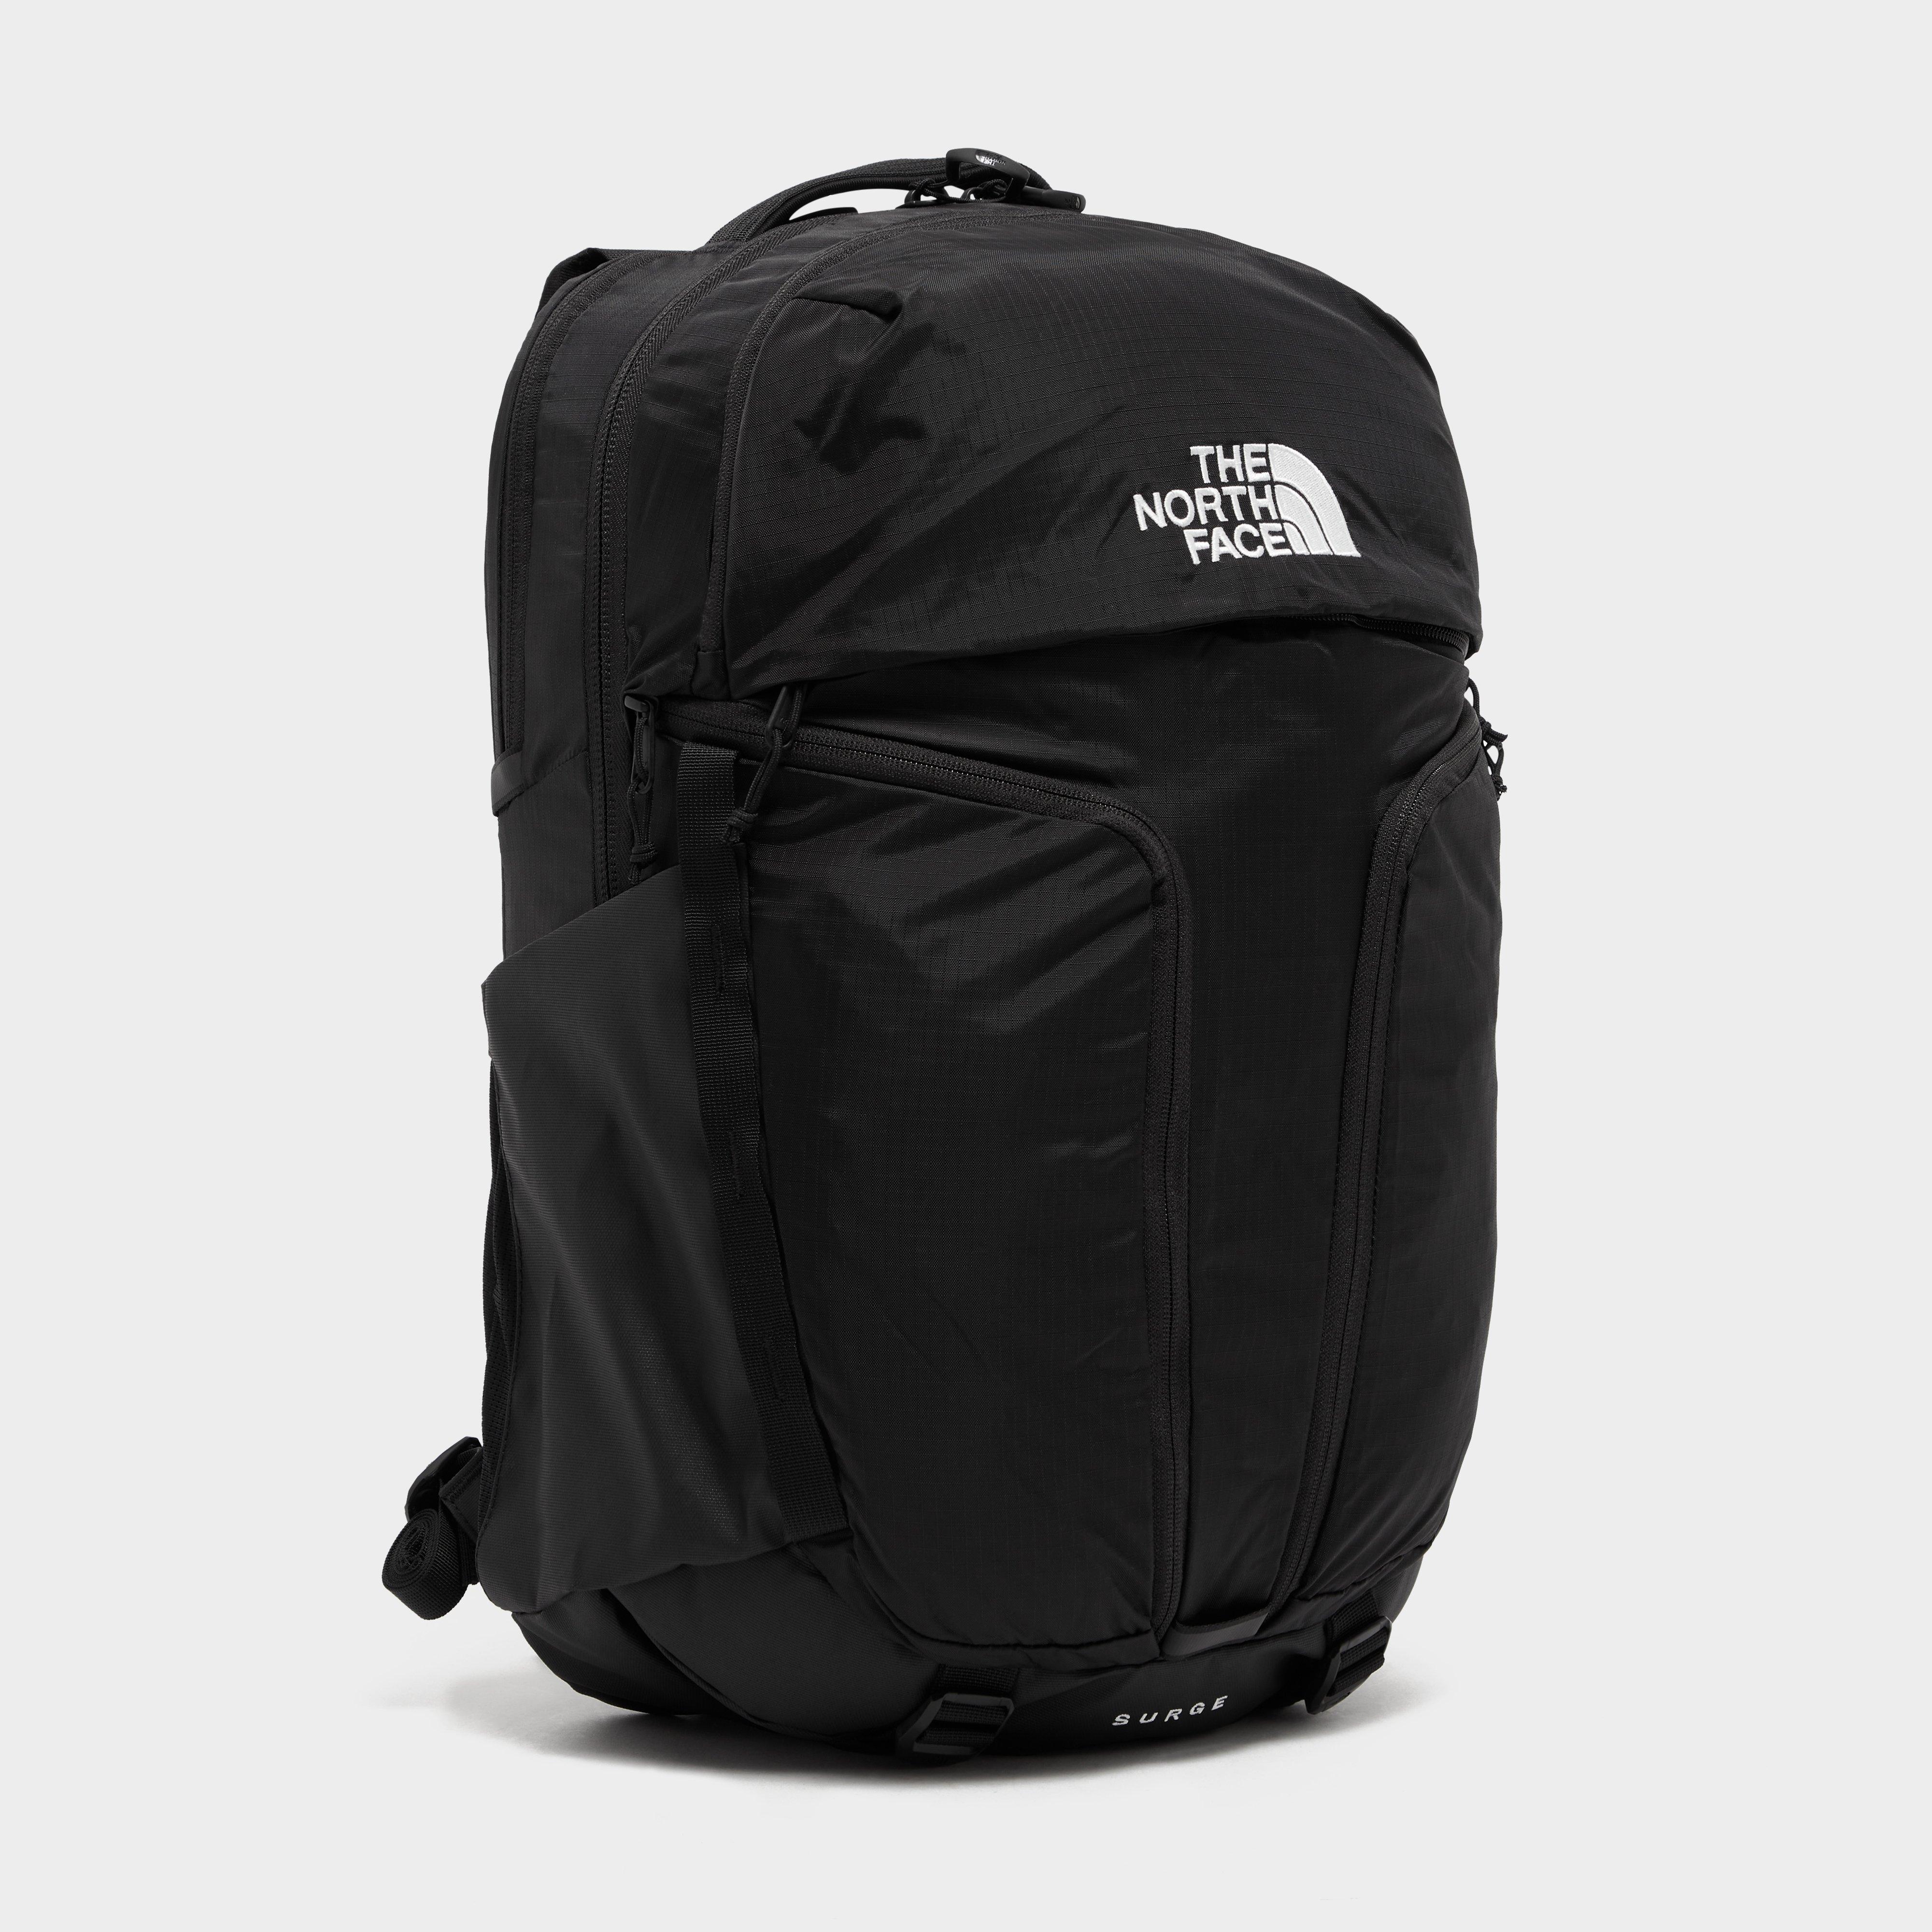  The North Face Surge Backpack